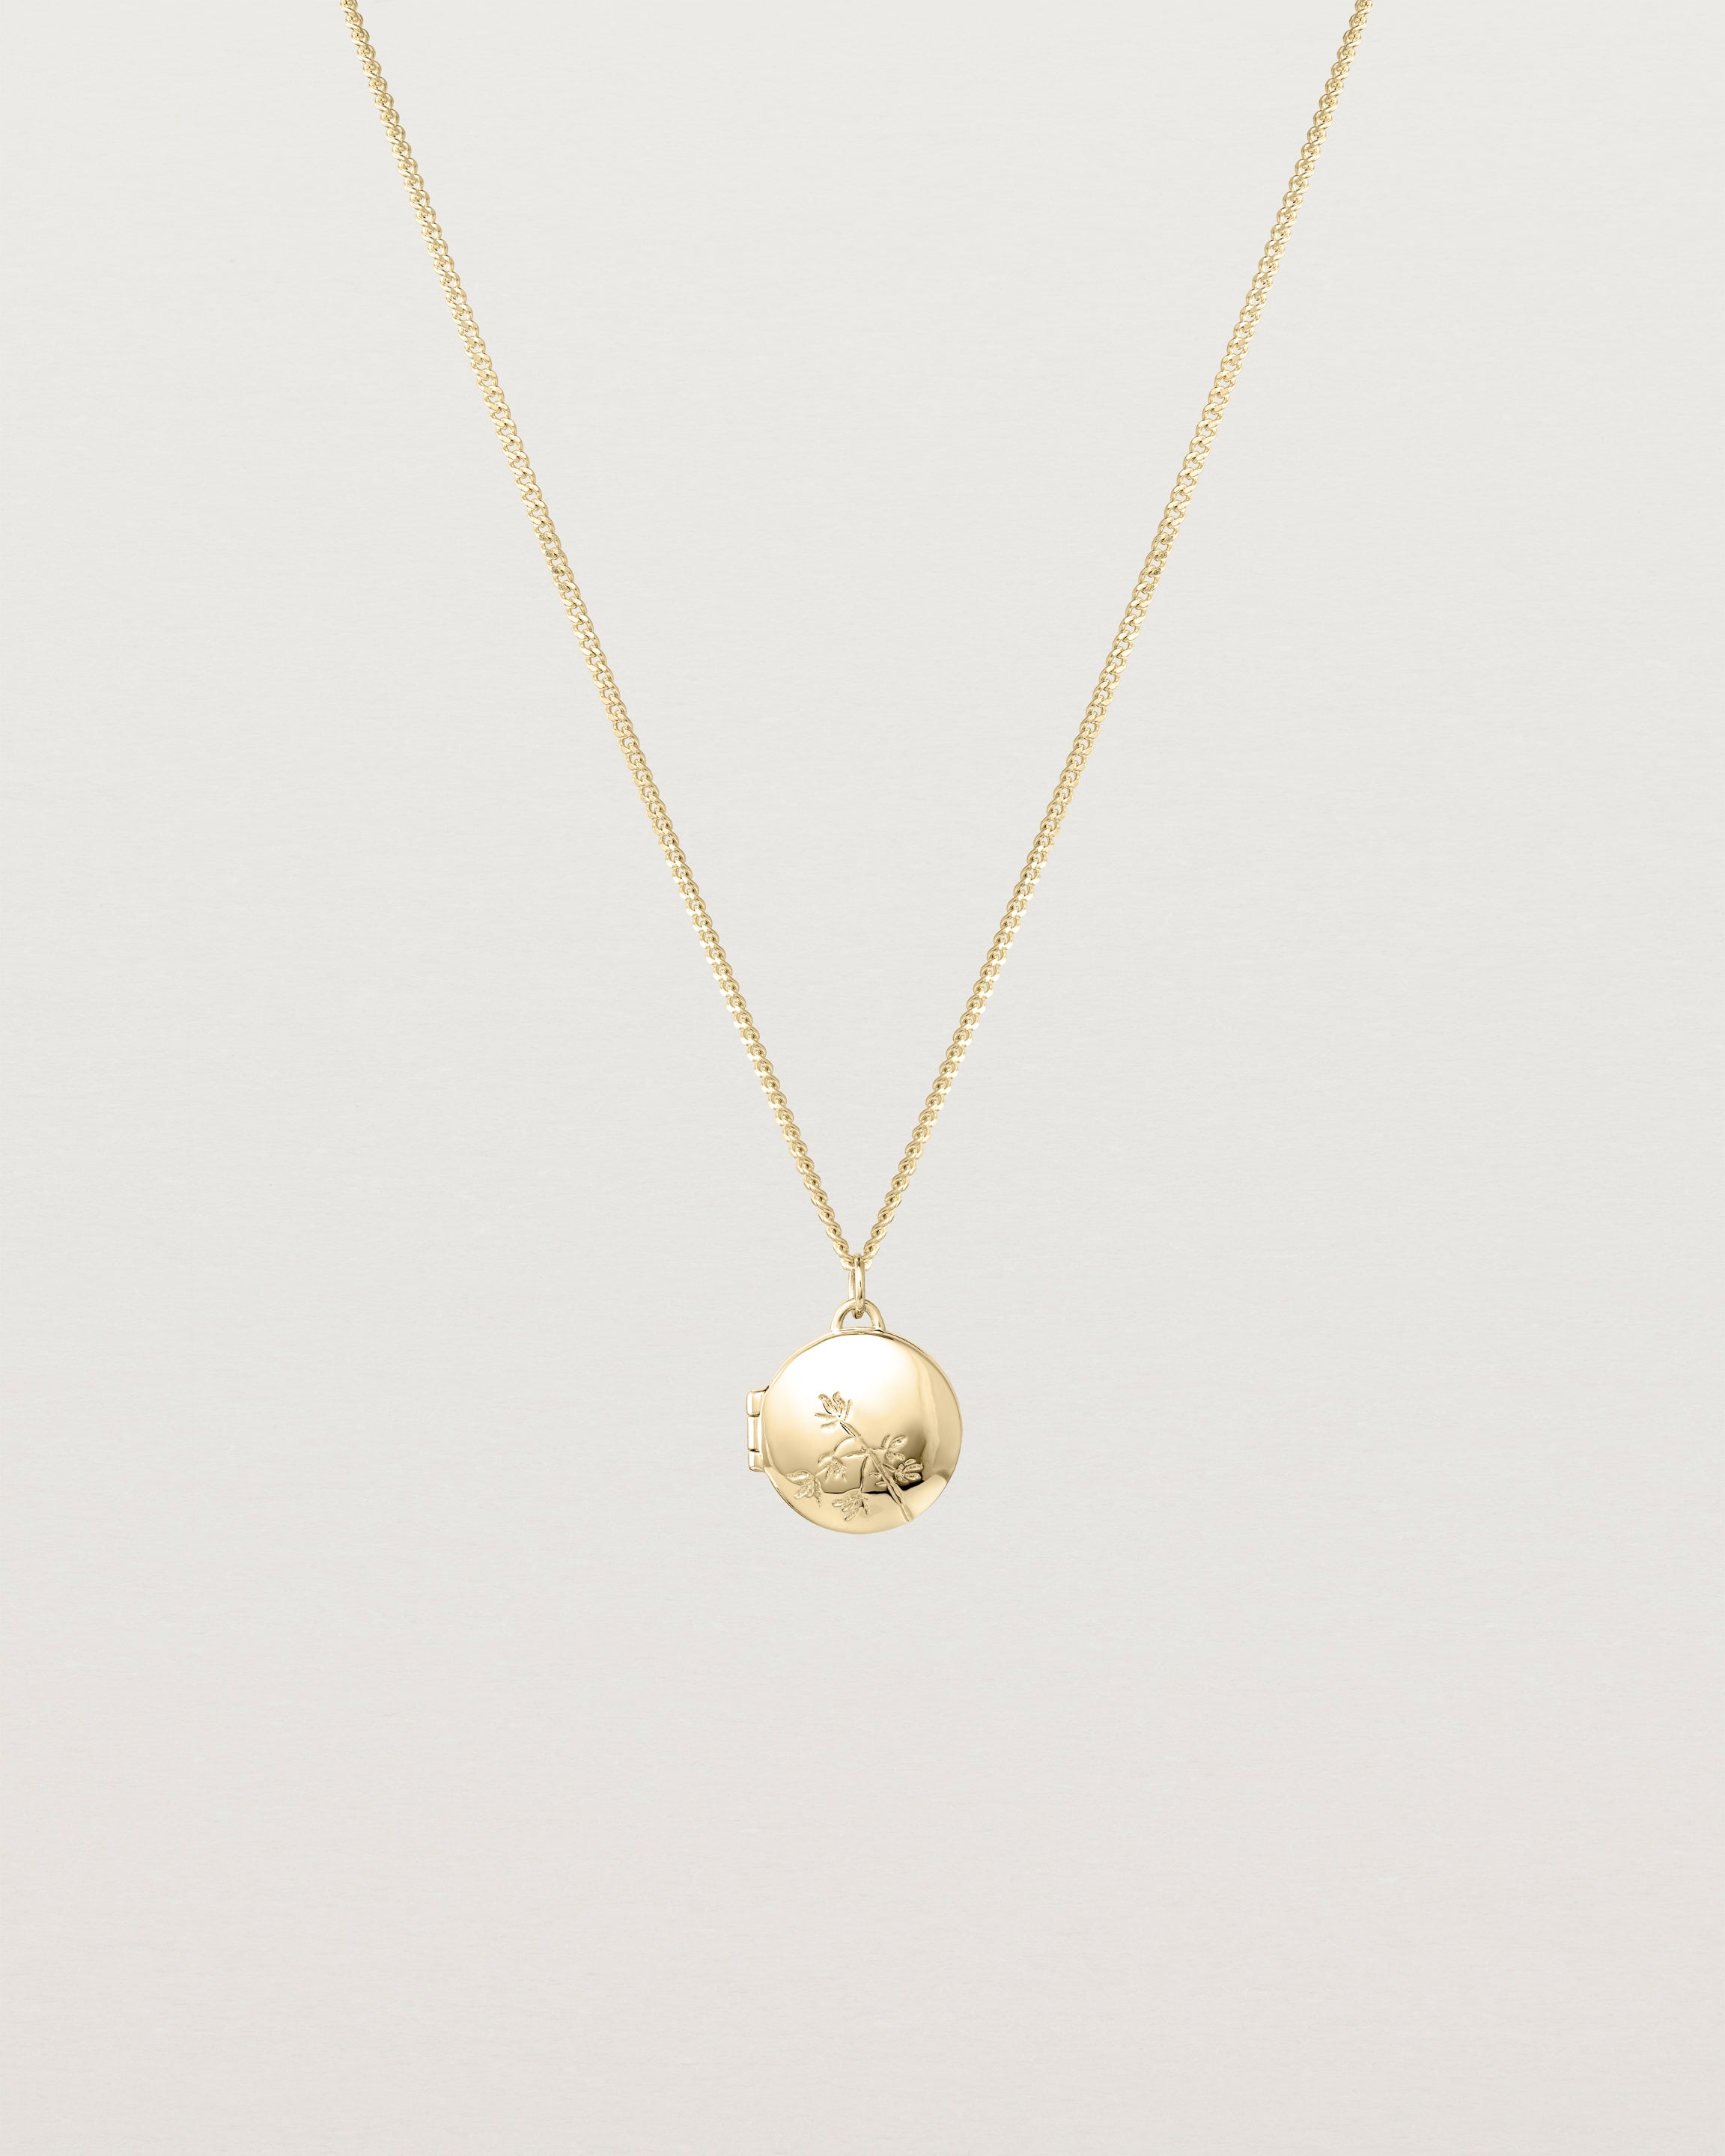 Front view of the Spotted Orchid Locket in yellow gold.